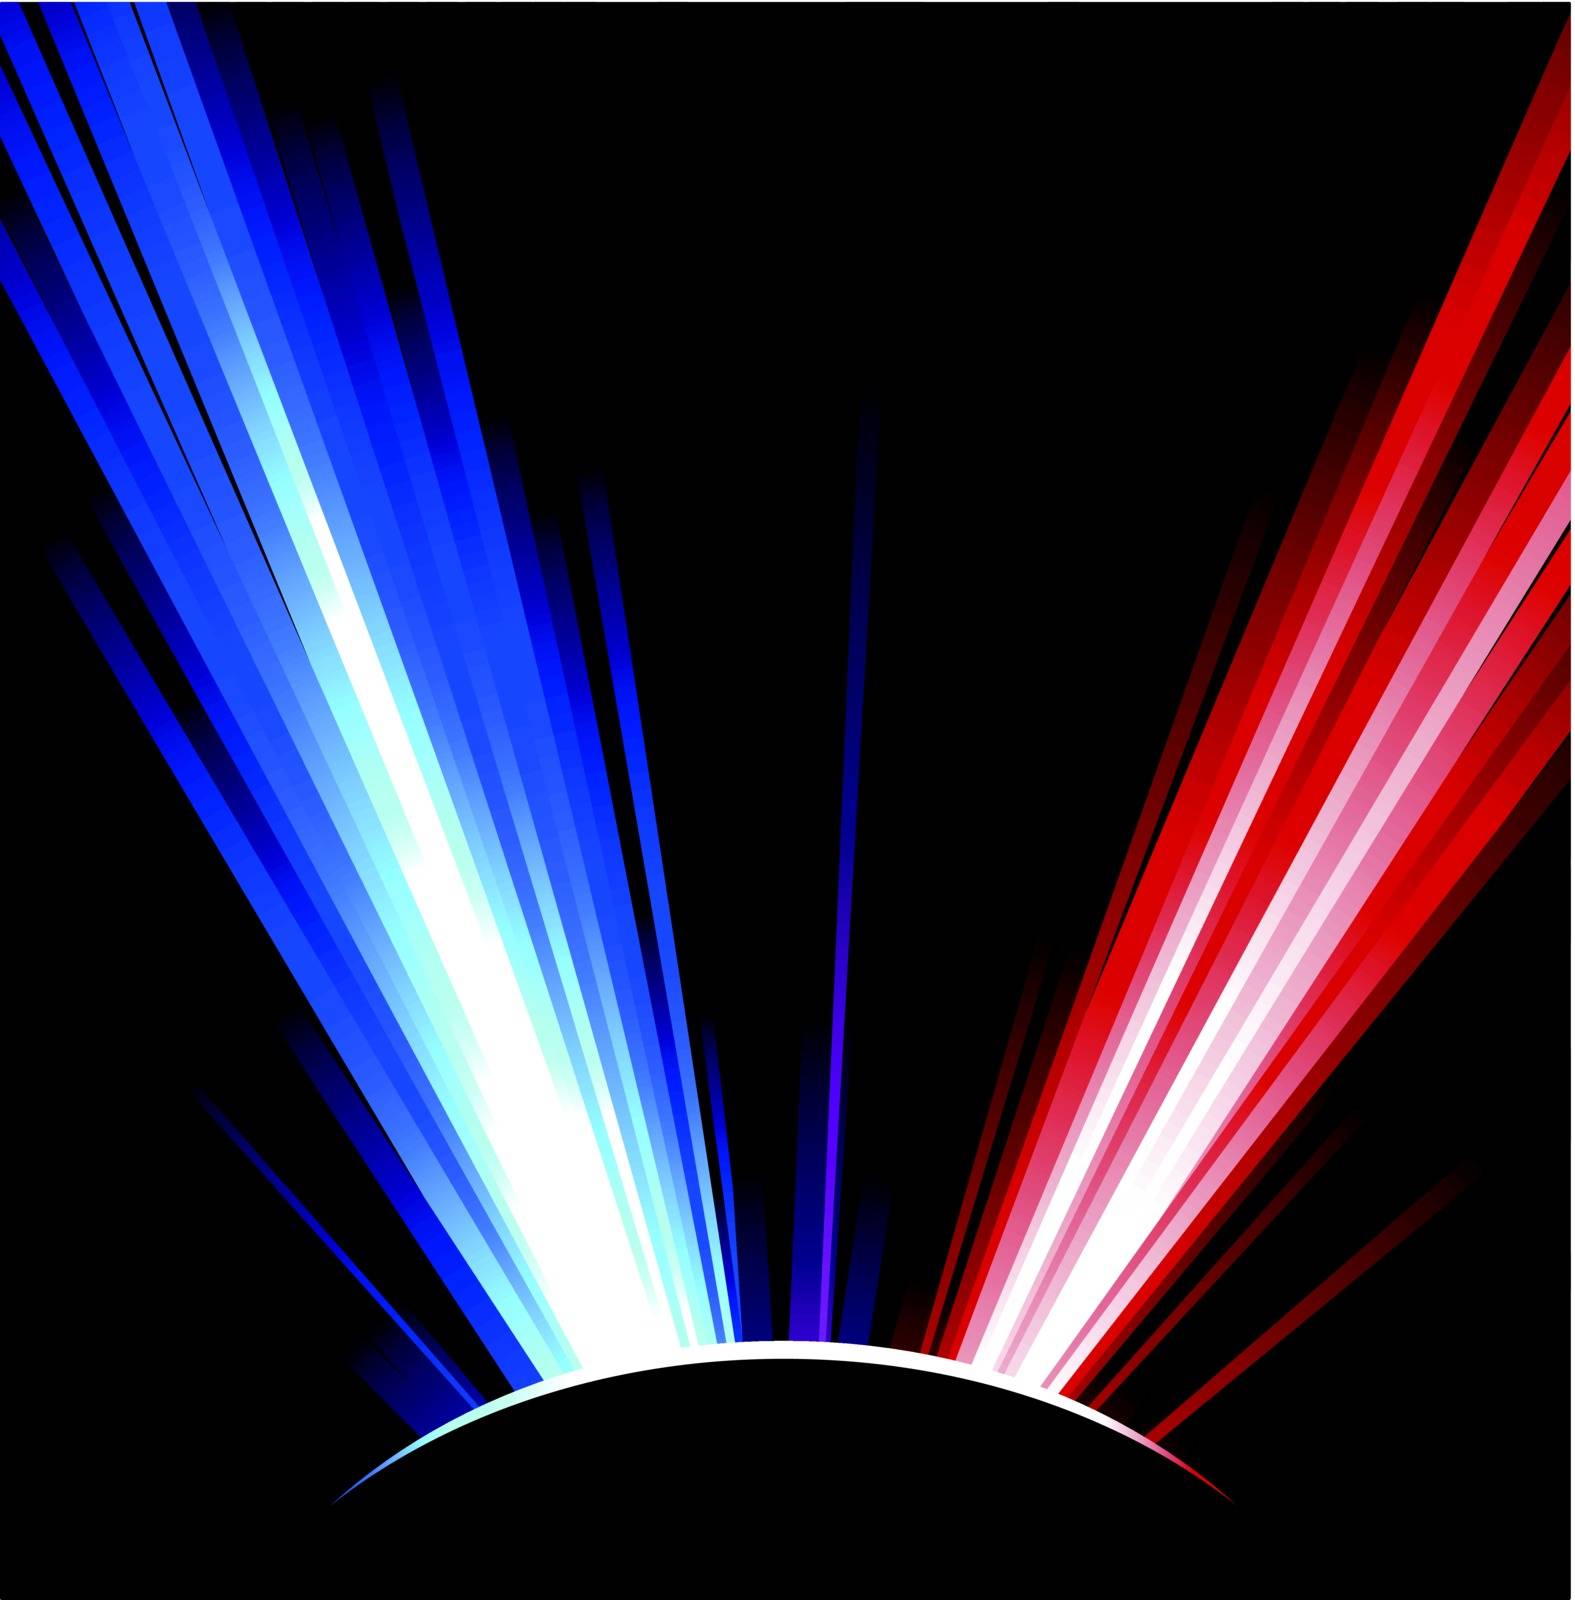 Red and blue rays on black background
